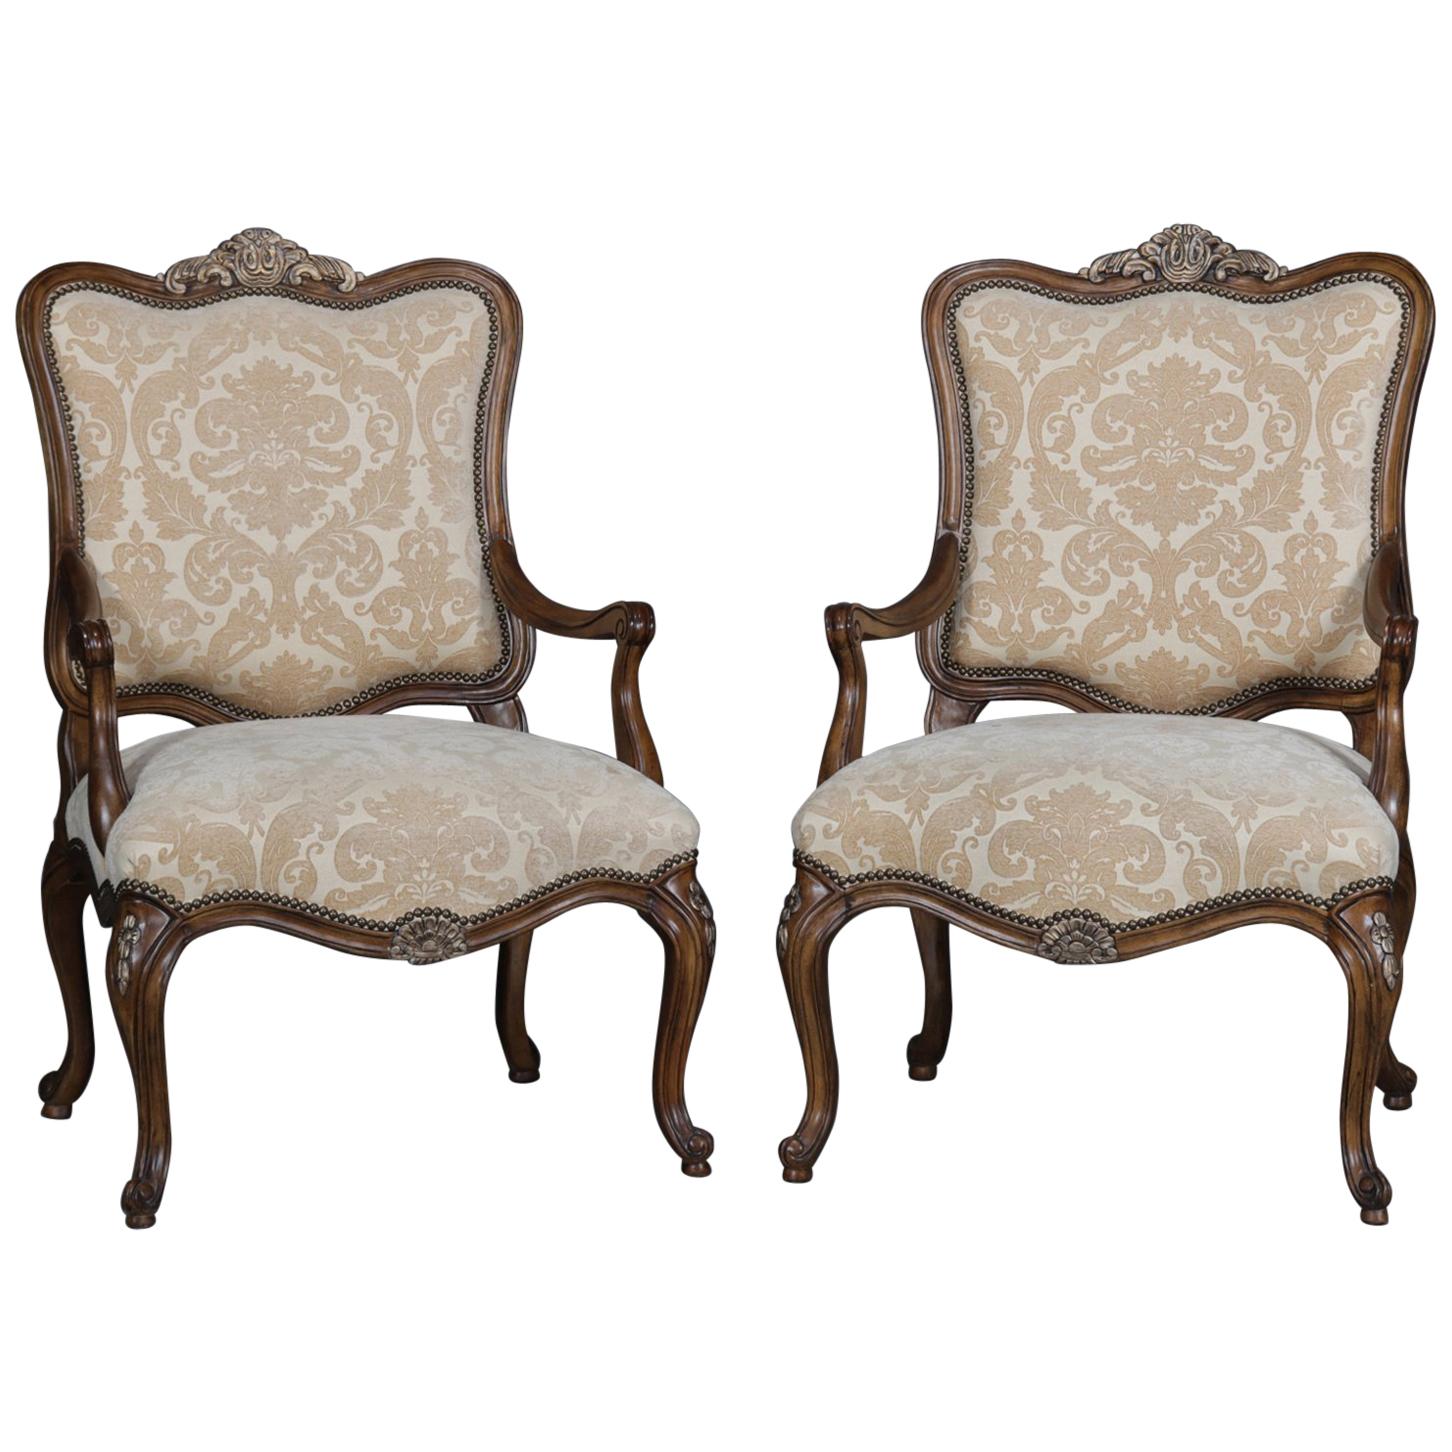 Pair of French Louis XV Style Carved and Gilt Mahogany Fauteuil Chairs